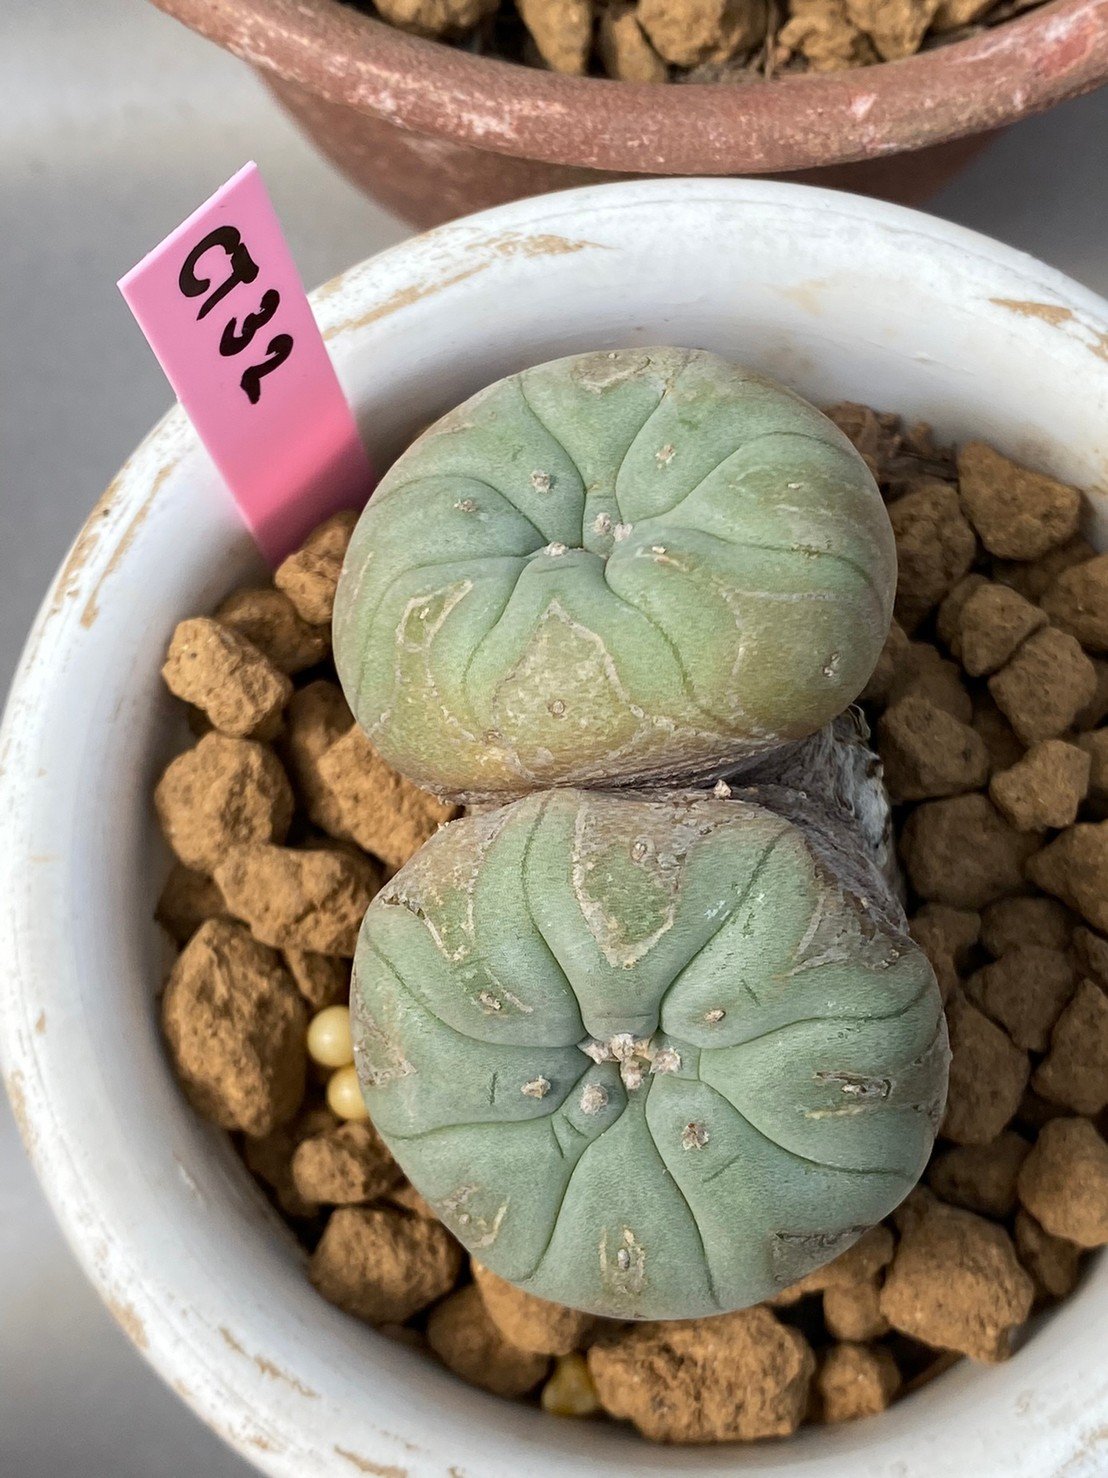 Lophophora williamsii Twin 5-6 cm 11 years old ownroot grow from seed from Japan